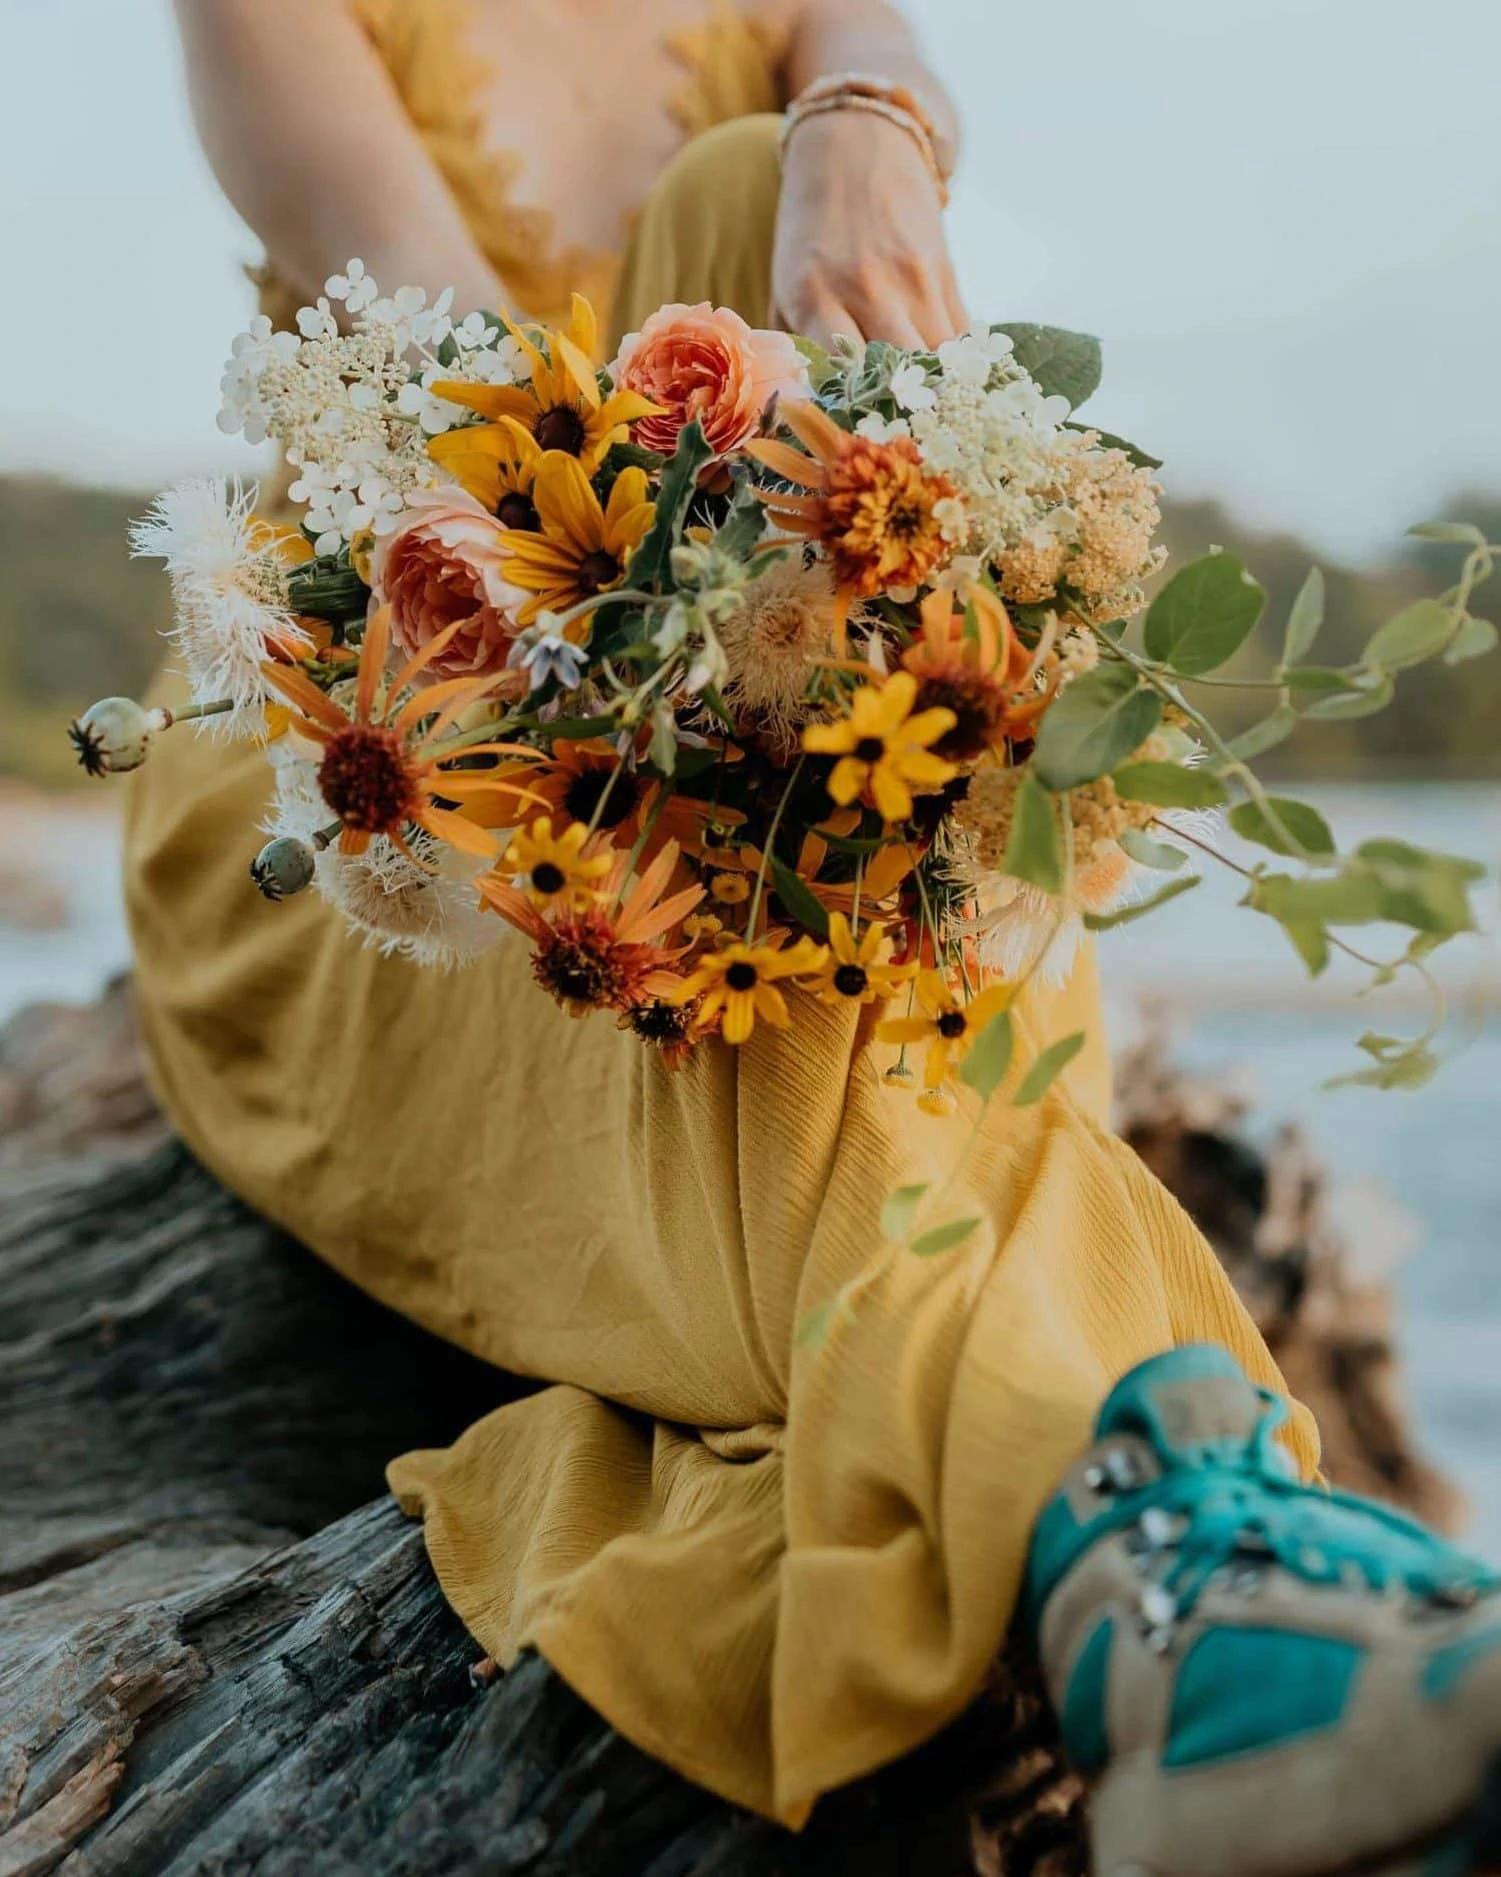 A bride in a yellow dress and vintage hiking boots shows off her bouquet.